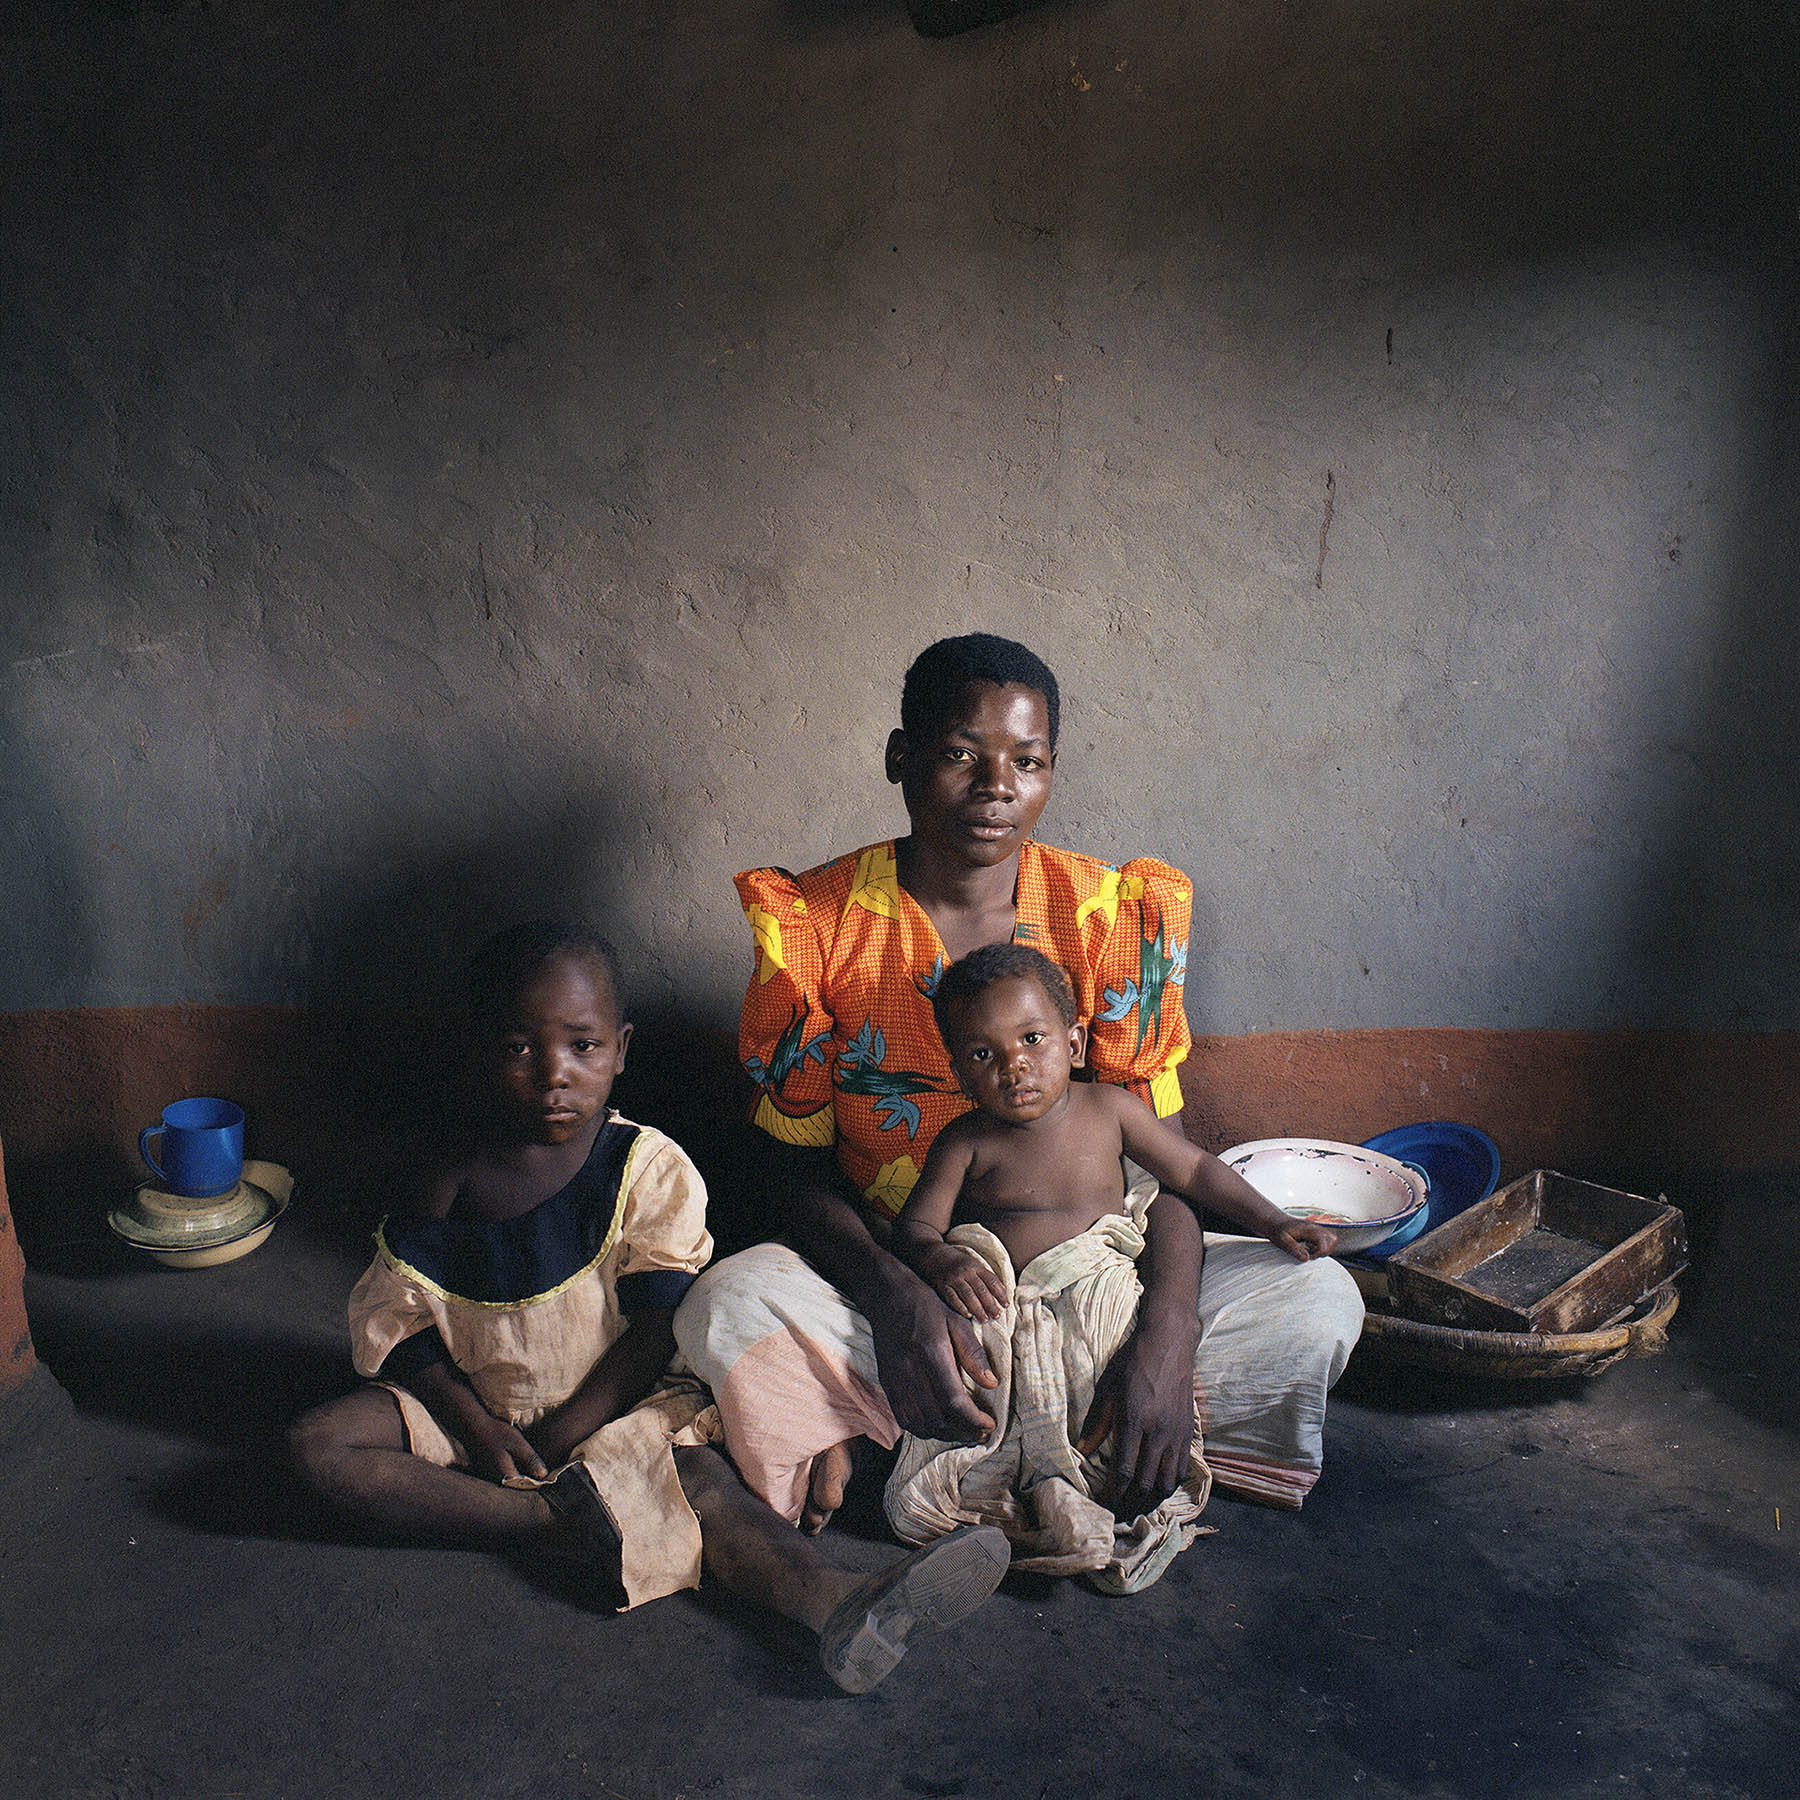 Malawi, Dickson, 11-2005.  She has contracted the aids virus. She is the only one in Dickson to admit it. Indoors only. To a stranger. Outside, nobody should know. In the village, only her parents are informed. They encourage her to persevere. Joyce Foliasi (27) with daughters Ndaziona (6) and Yankho (11 months). Ndaziona means: “I have a lot of worries”. Yankho is the local word for “answer”.  